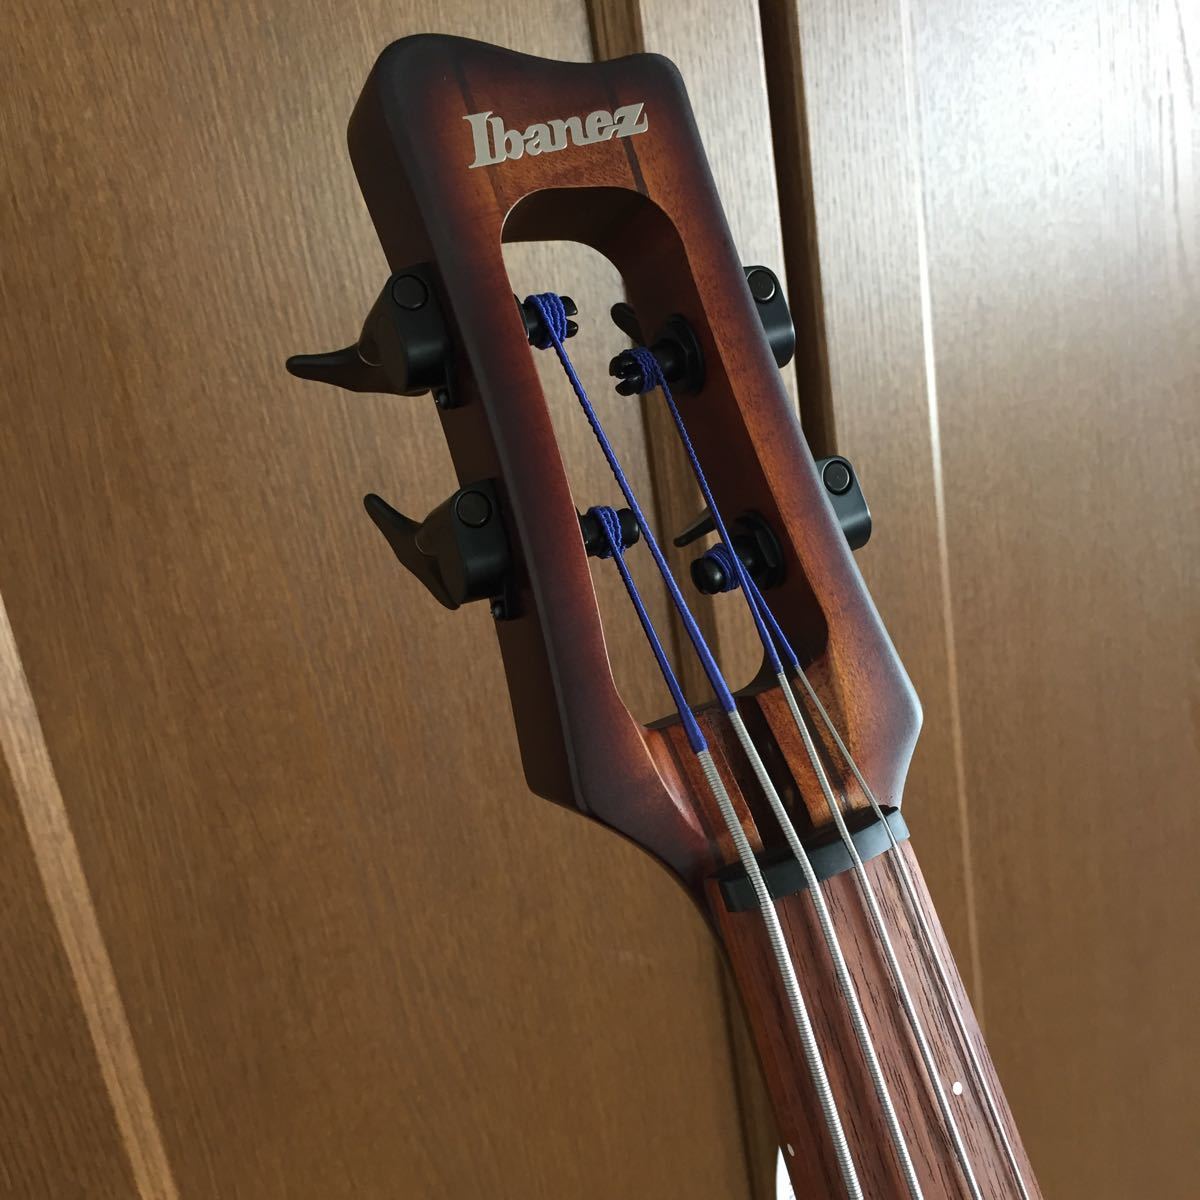  new goods stock have immediate payment Ibanez upright bass UB804/MOB